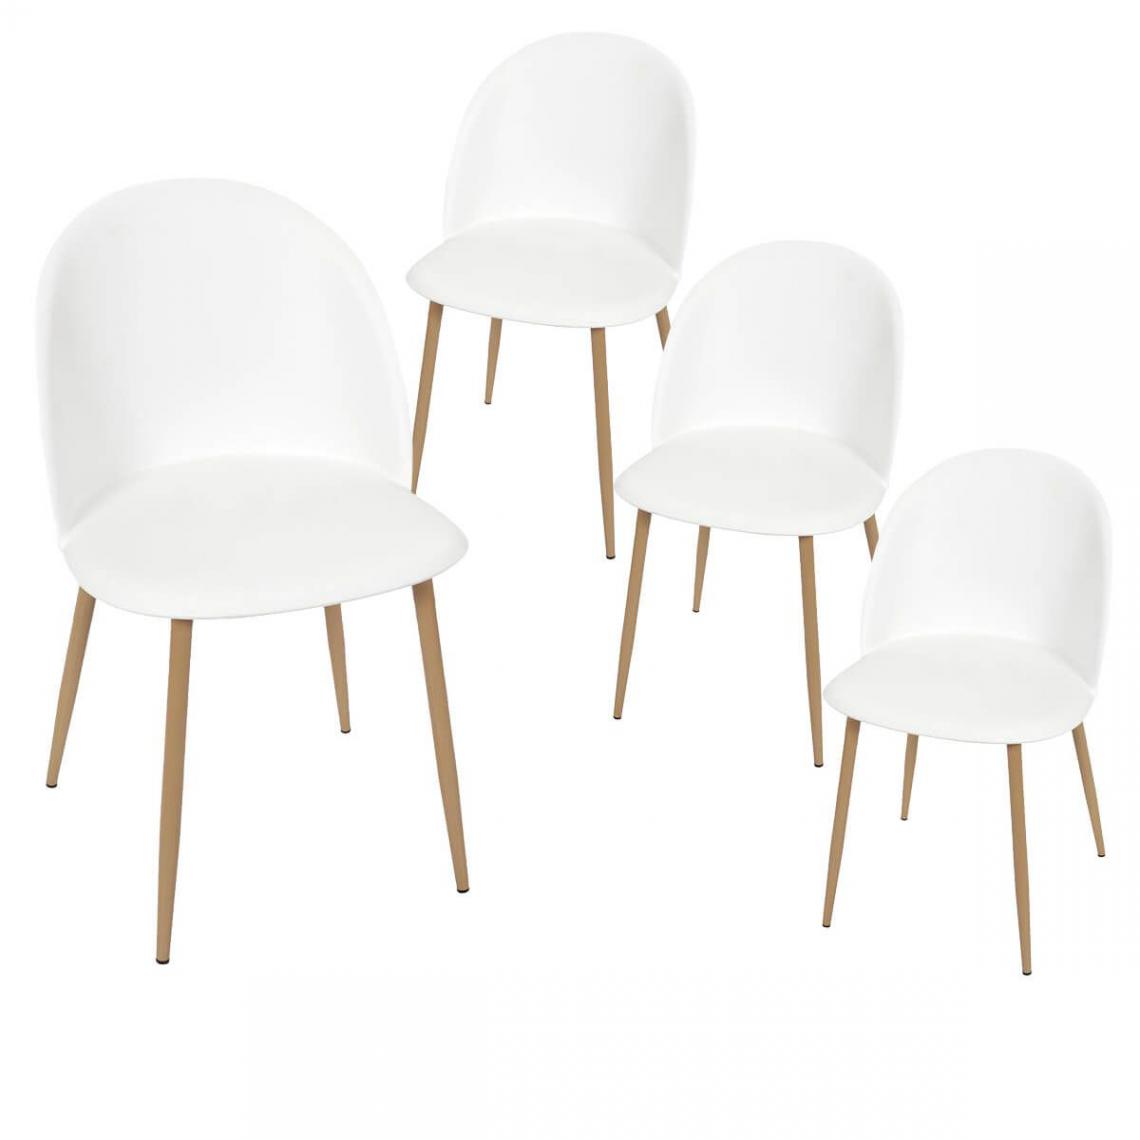 Altobuy - MADDY - Lot de 4 Chaises Scandinaves Blanches - Chaises